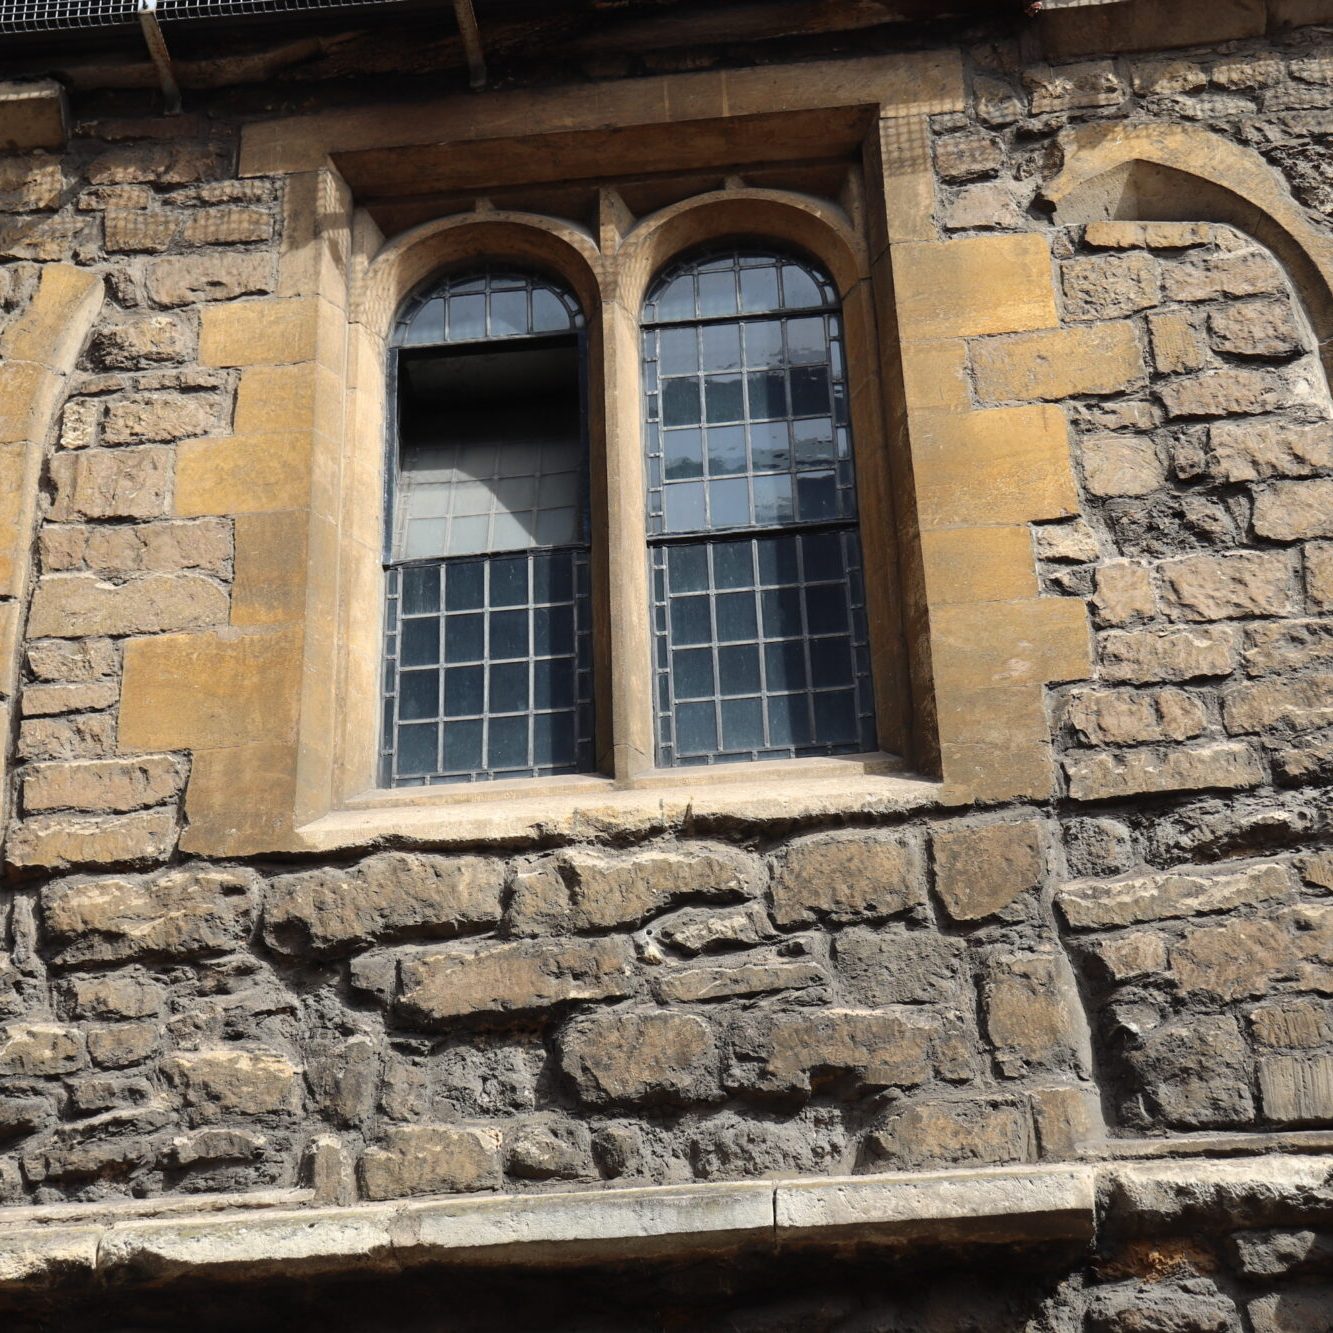 View of a window in a stone wall with masonry indicating where a larger window once sat in the wall.